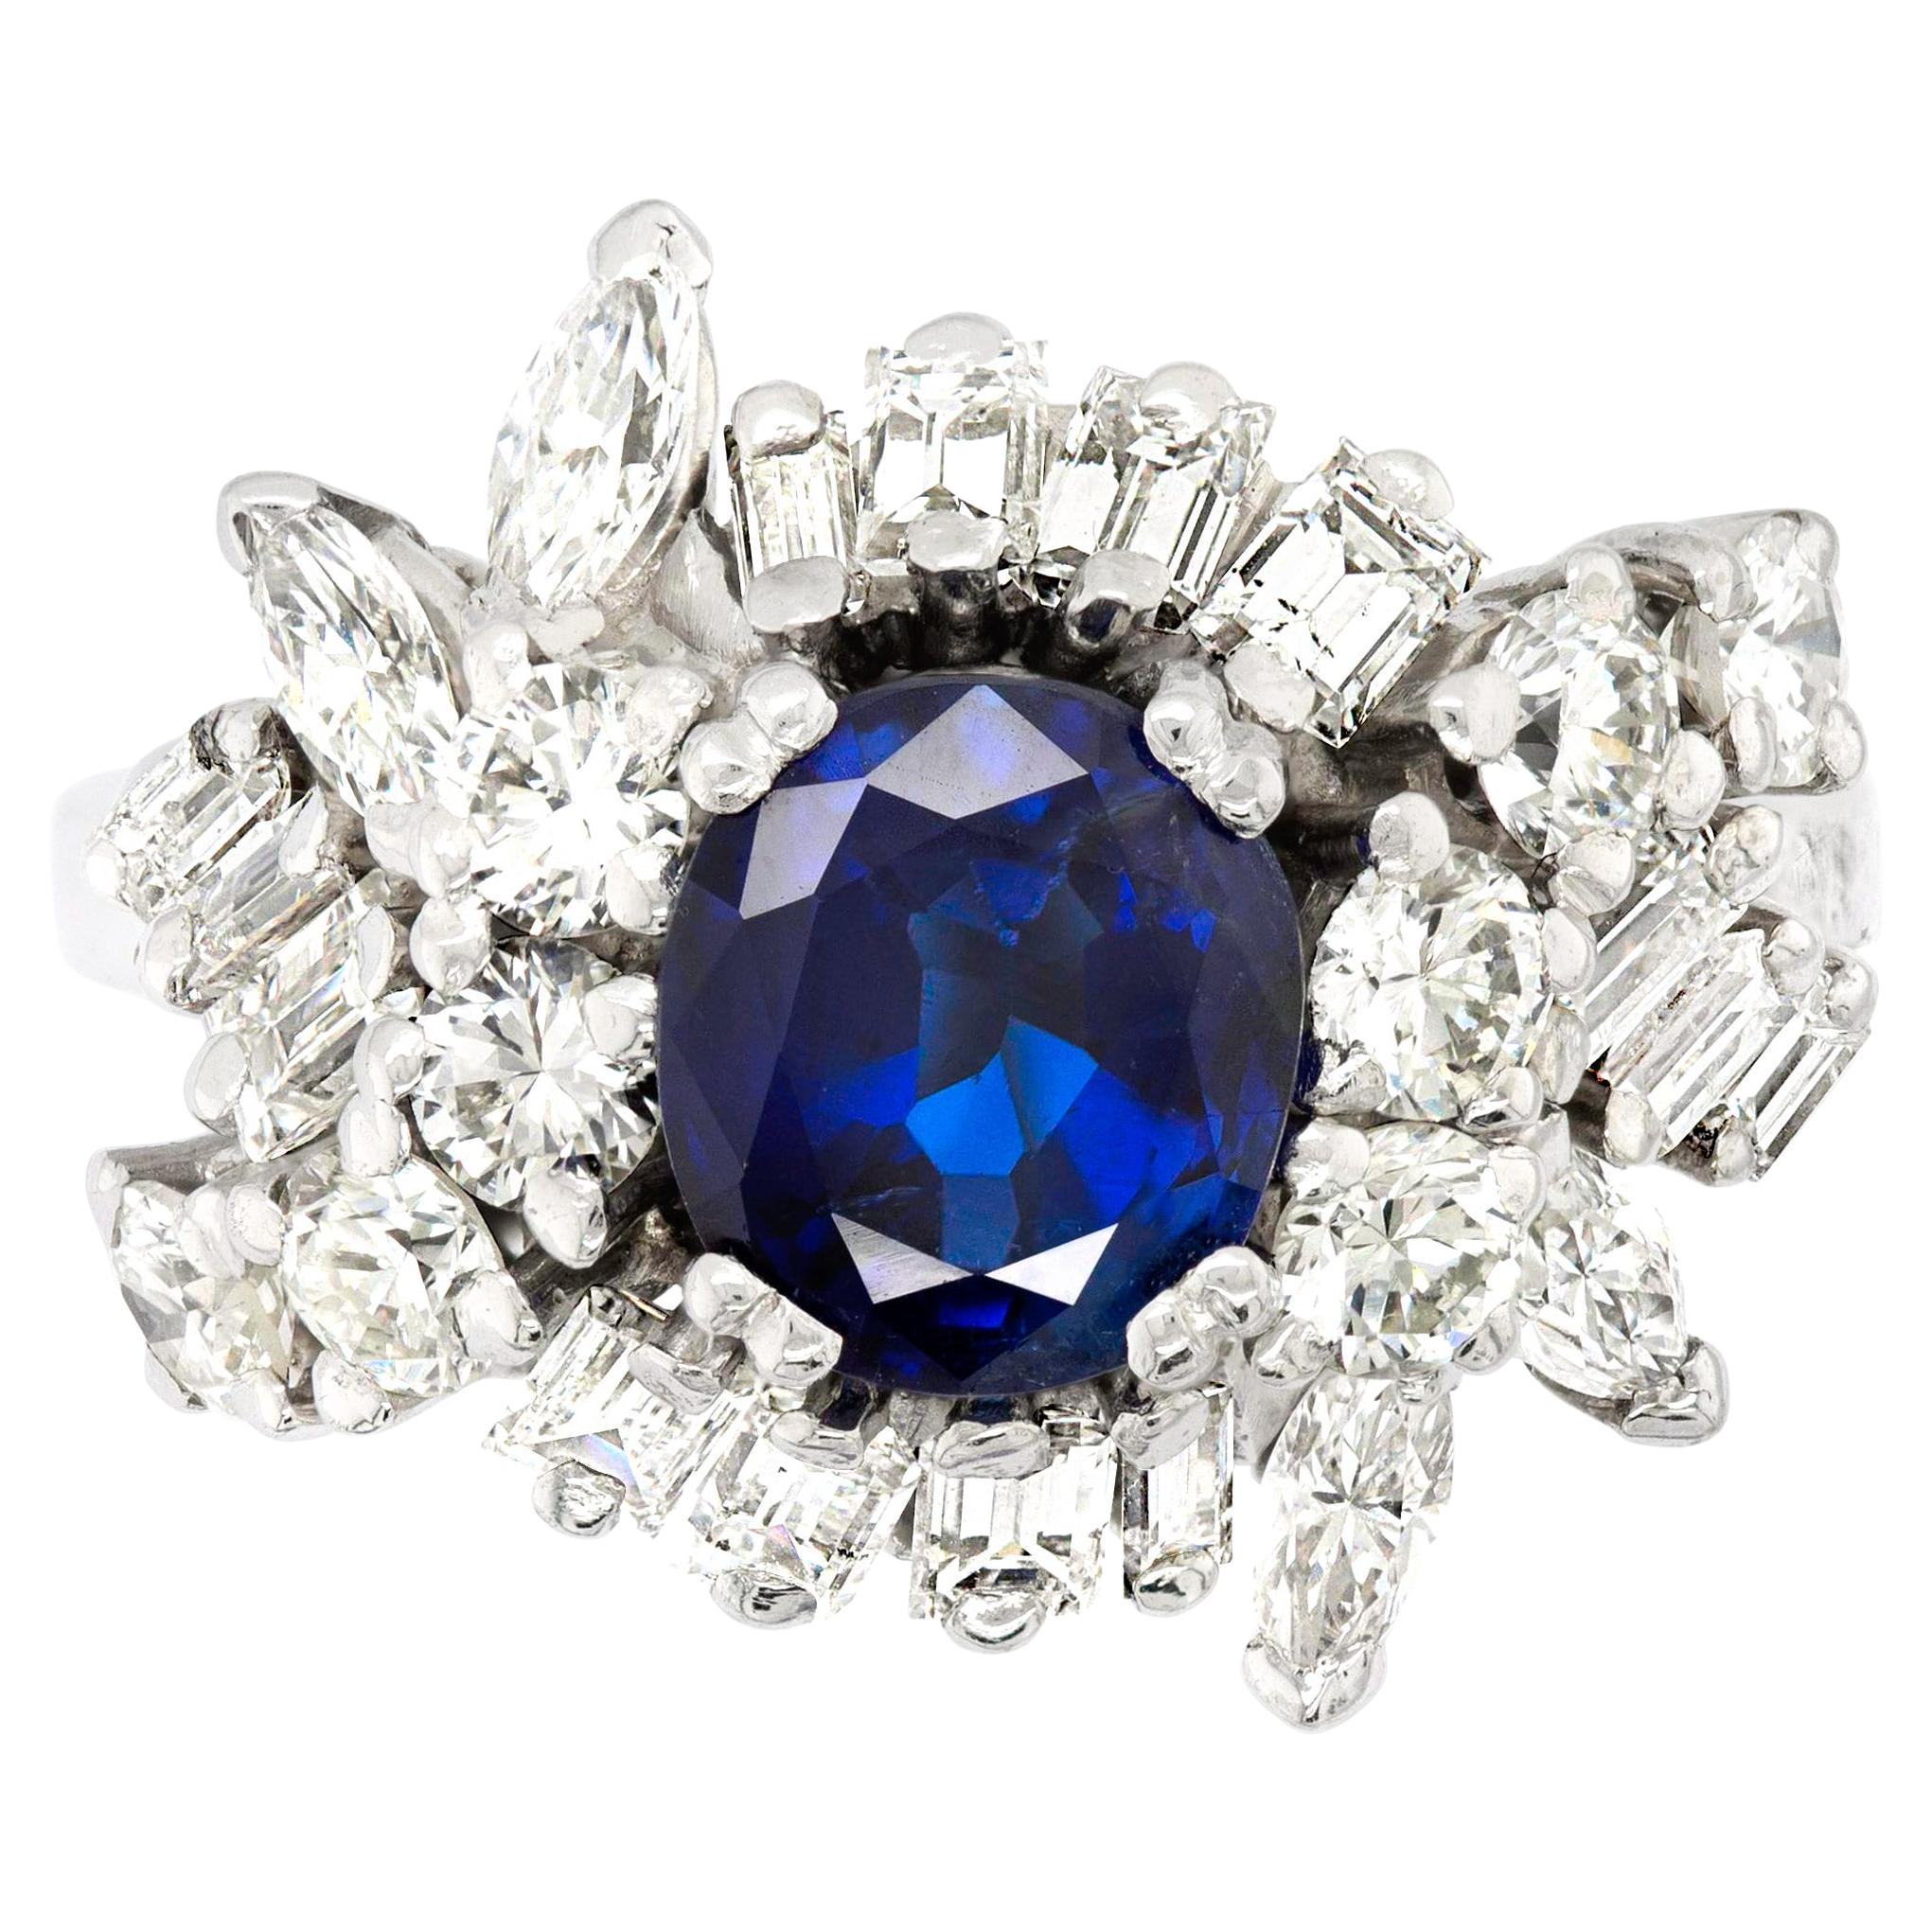 Vintage 2.02 Ct. Burma Sapphire and Diamond Cluster Cocktail Ring GIA